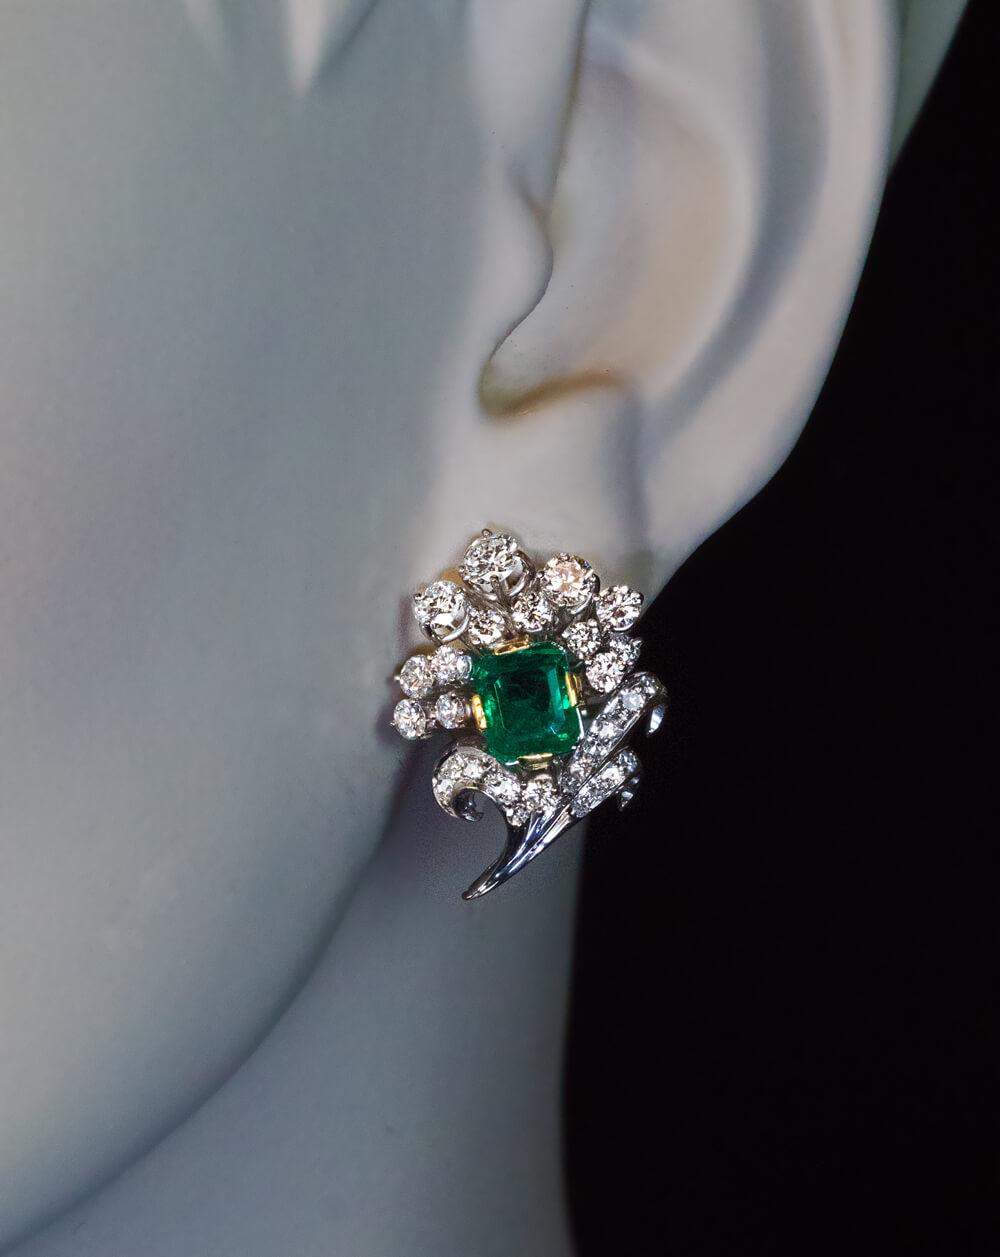 Circa 1950s
The earrings are crafted in 18K white gold (14K gold posts). They are designed as sprays of flowers set with two bluish green emeralds (0.98 ct and 0.91 ct) and high quality bright white diamonds (E-F color, VS1-VS2 clarity).
Total